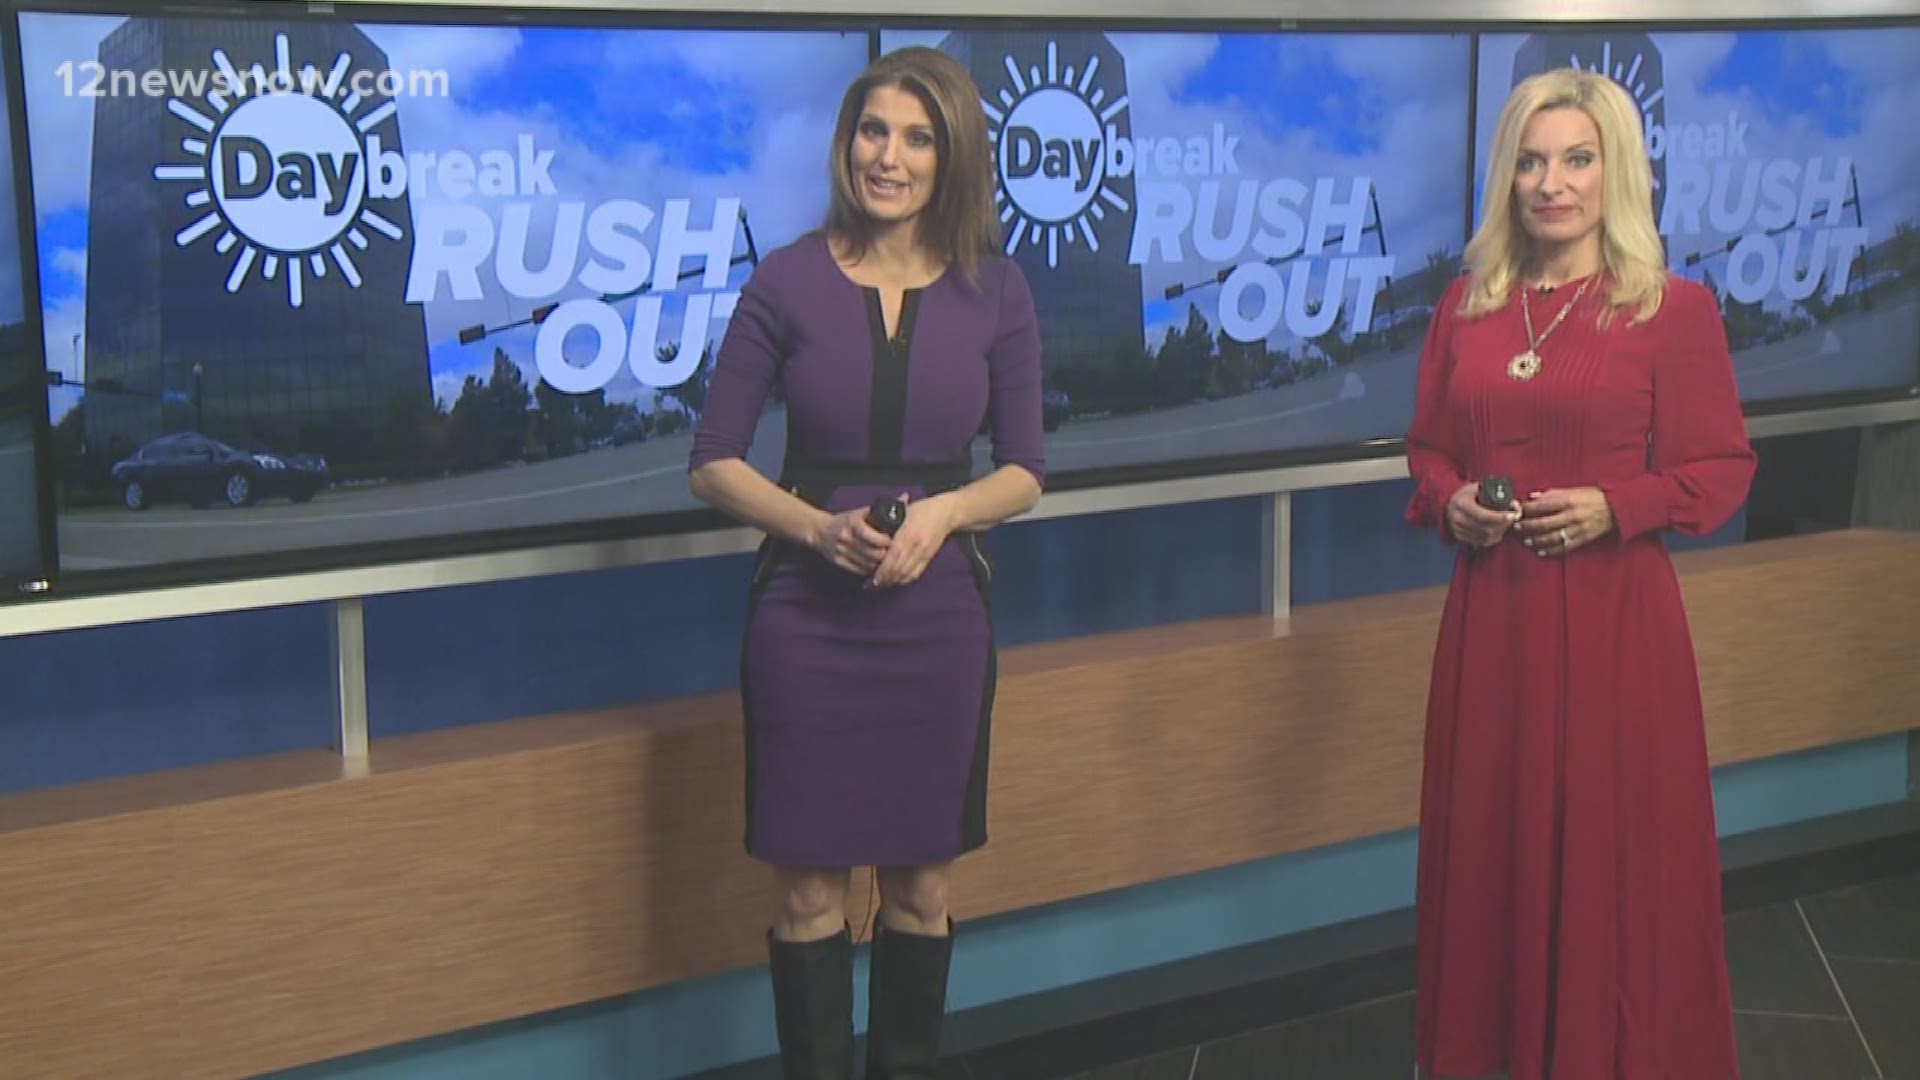 Monday morning Daybreak Rush Out | 12newsnow.com